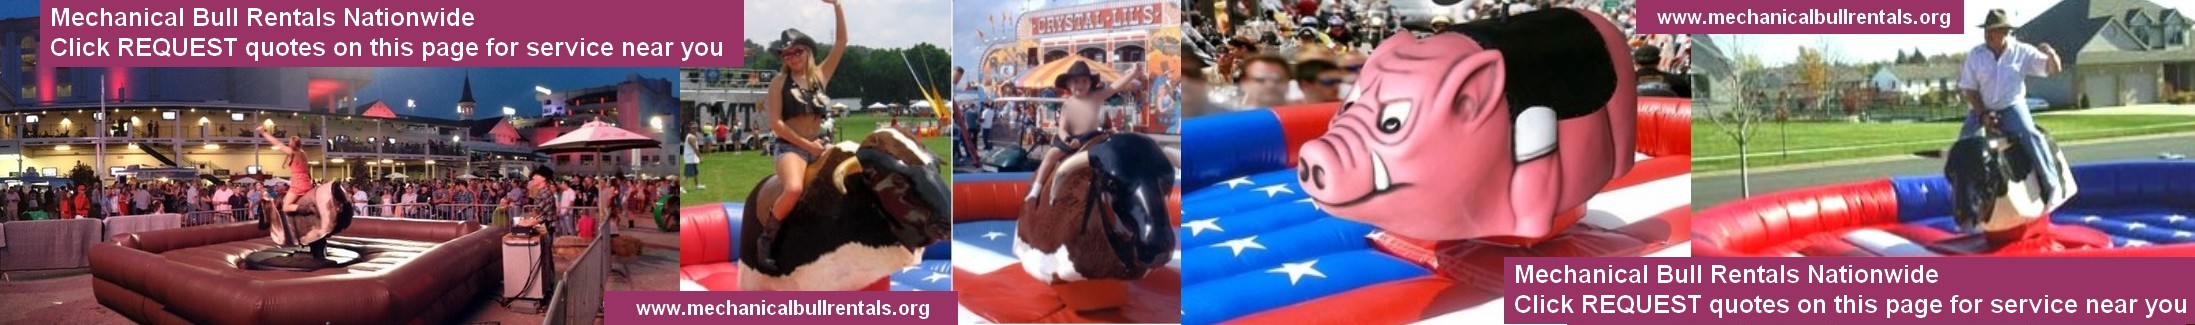 Mechanical Bull Rentals Rochester Minnesota MN and near you. Free referrals to local mechanical bull companies LOGO